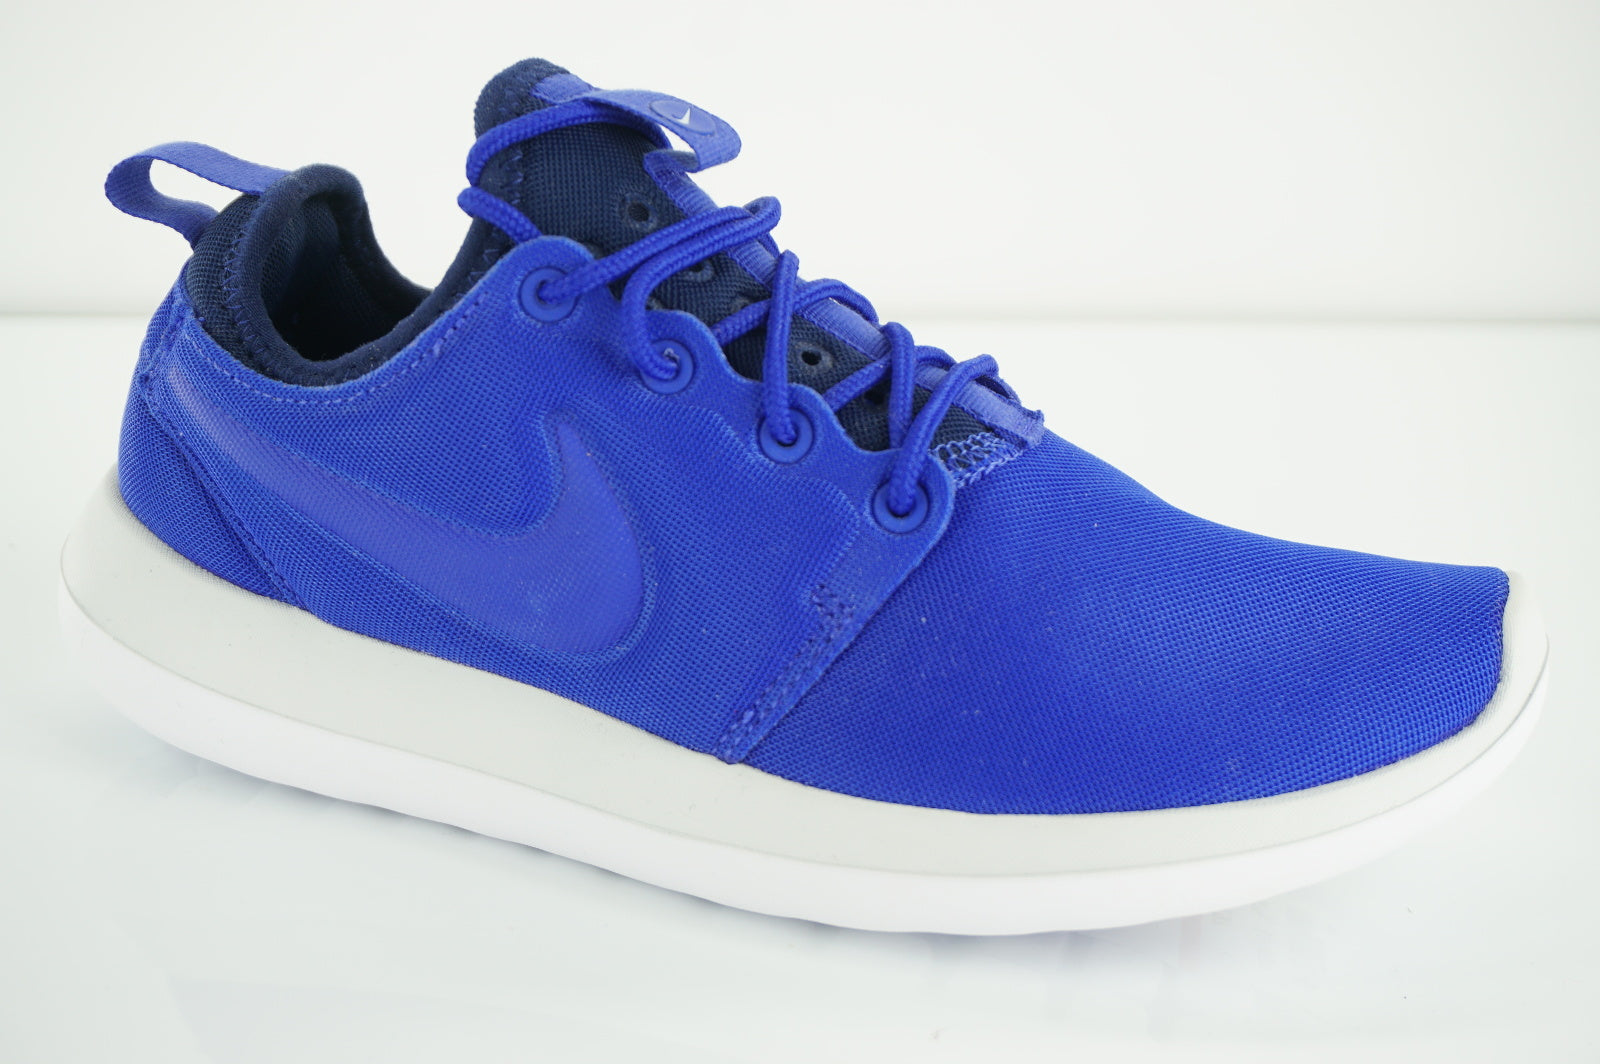 Nike Roshe Two Womens Running Shoes SZ 6 Paramount Blue New $96